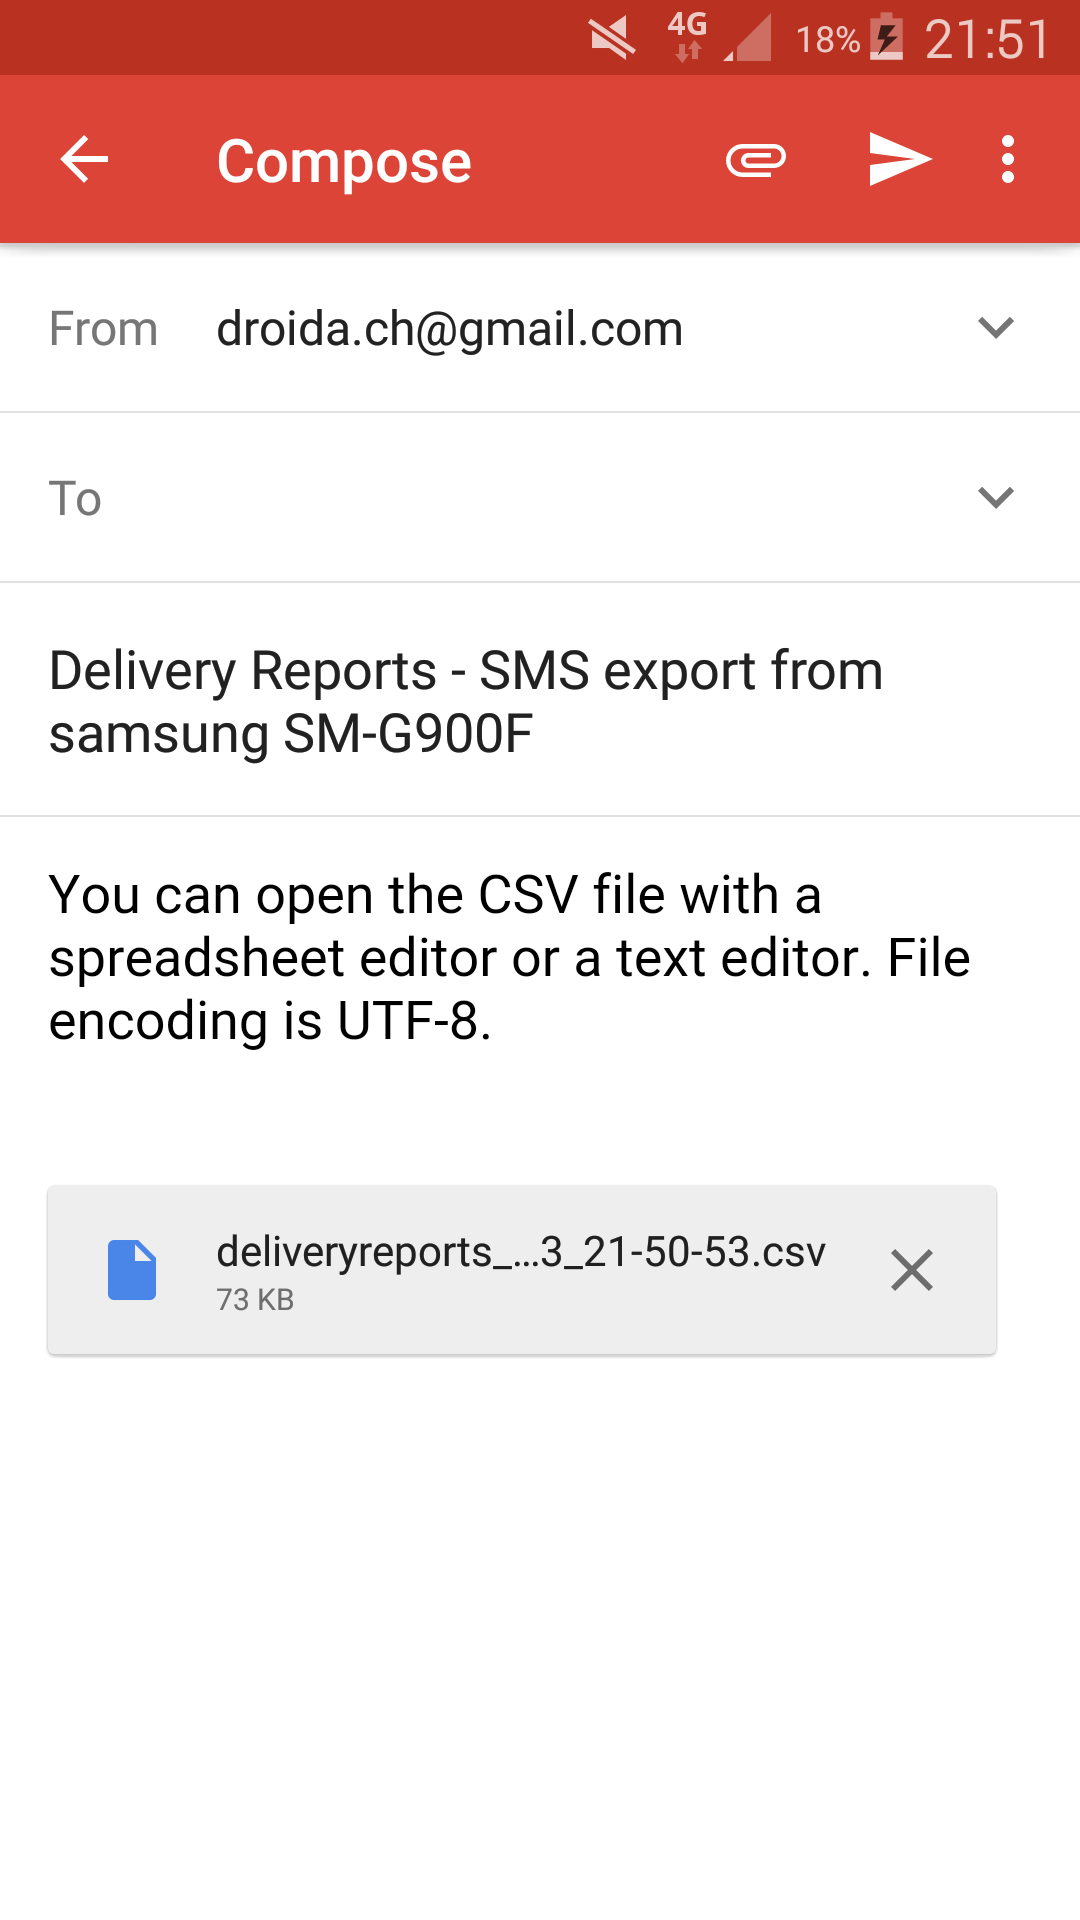 Exported by email